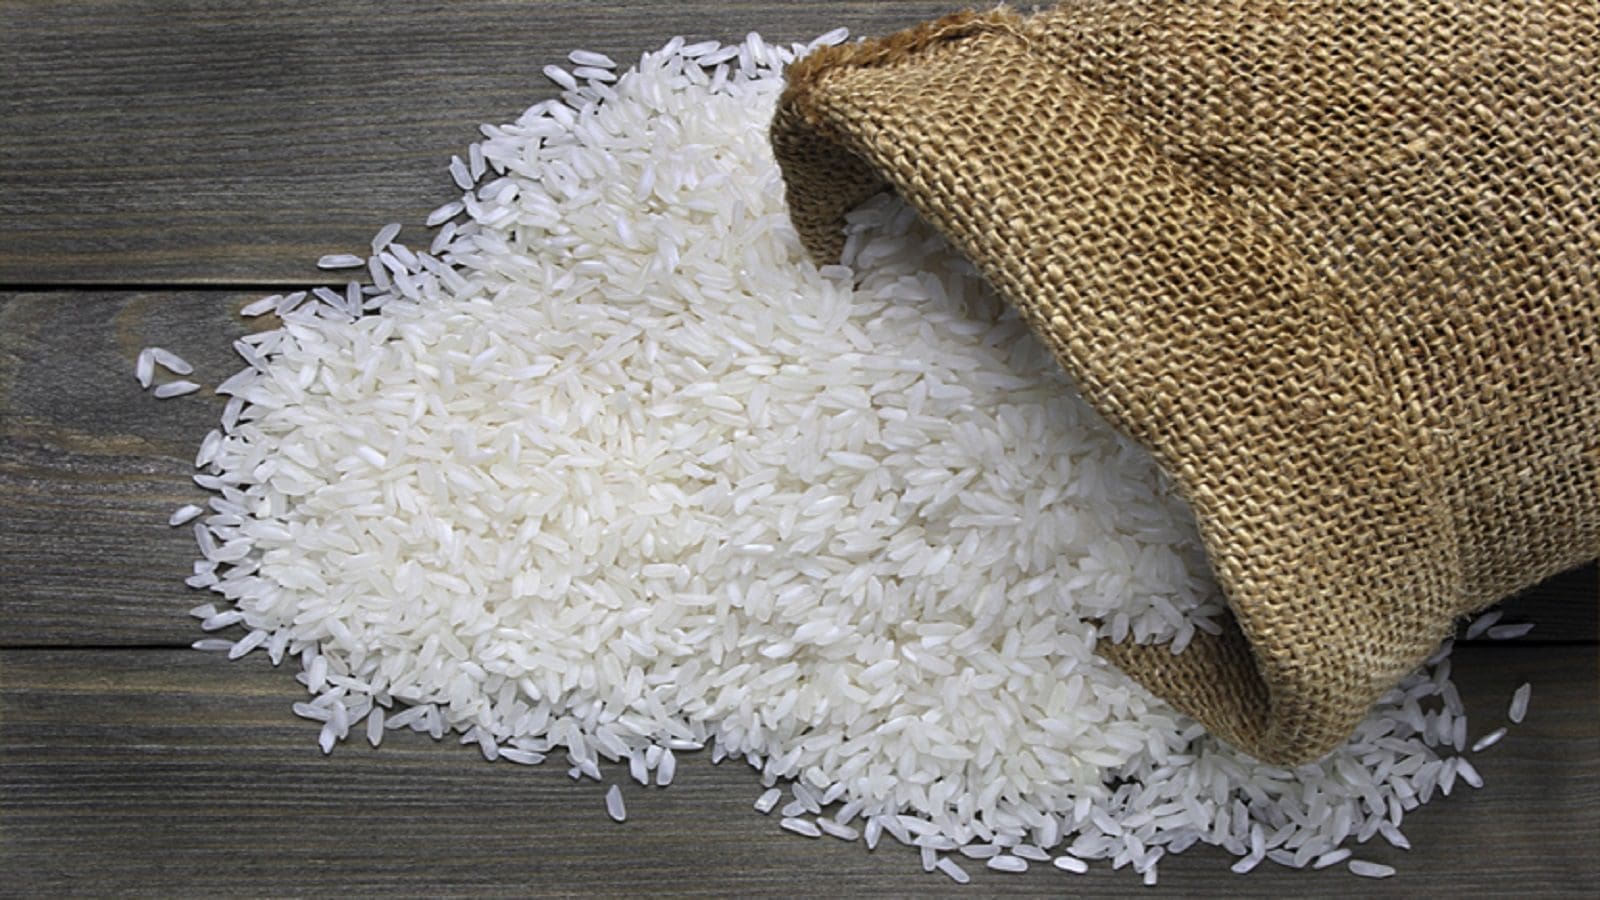 India permits shipment of 650,000 tonnes of broken rice to three African countries